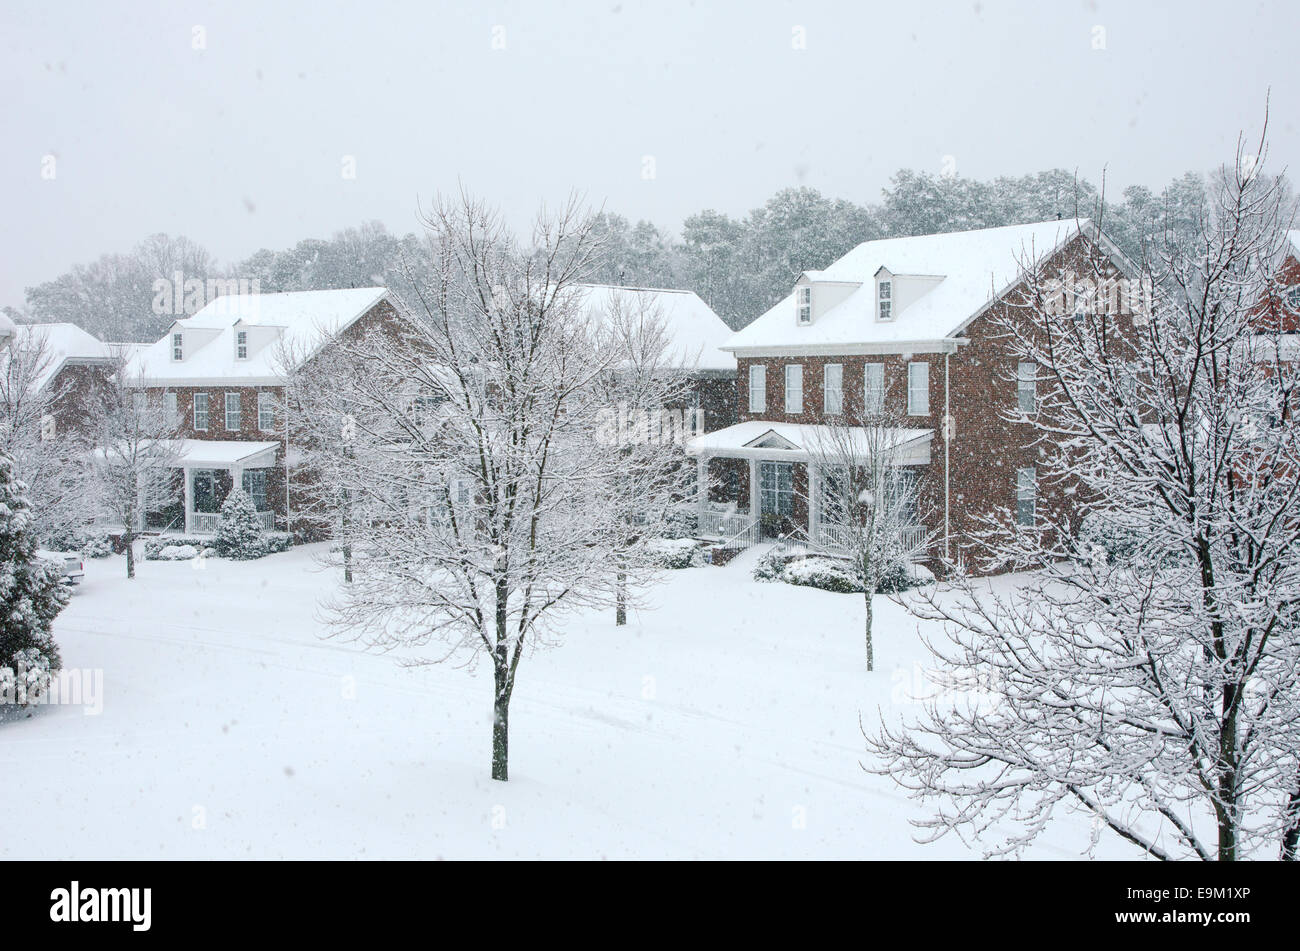 Traditional, brick homes are captured during a snow storm in this beautiful, Winter scene. Stock Photo